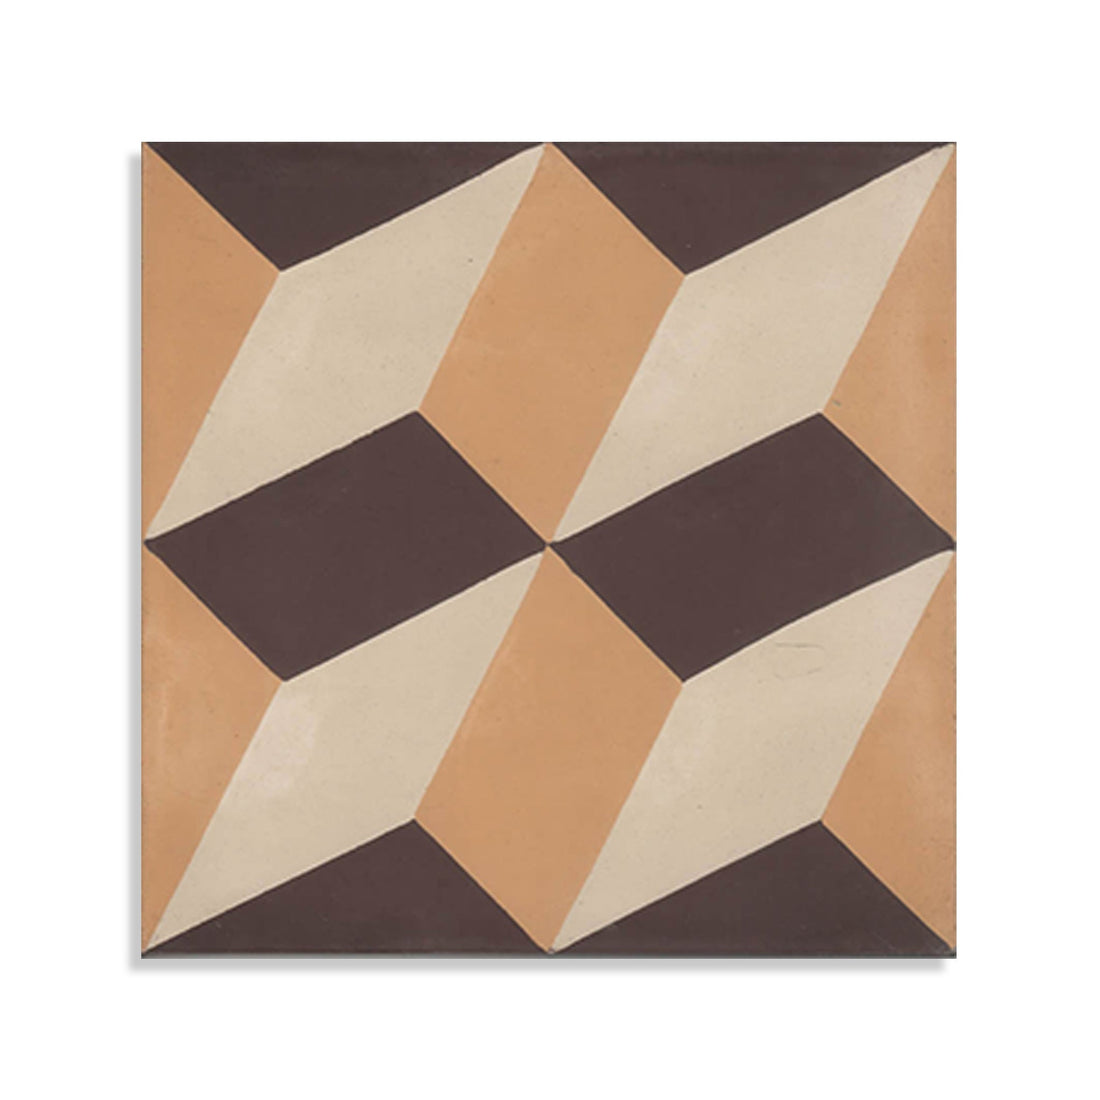 Moroccan Encaustic Cement Pattern 05c, 20 x 20cm - Tiles &amp; Stone To You